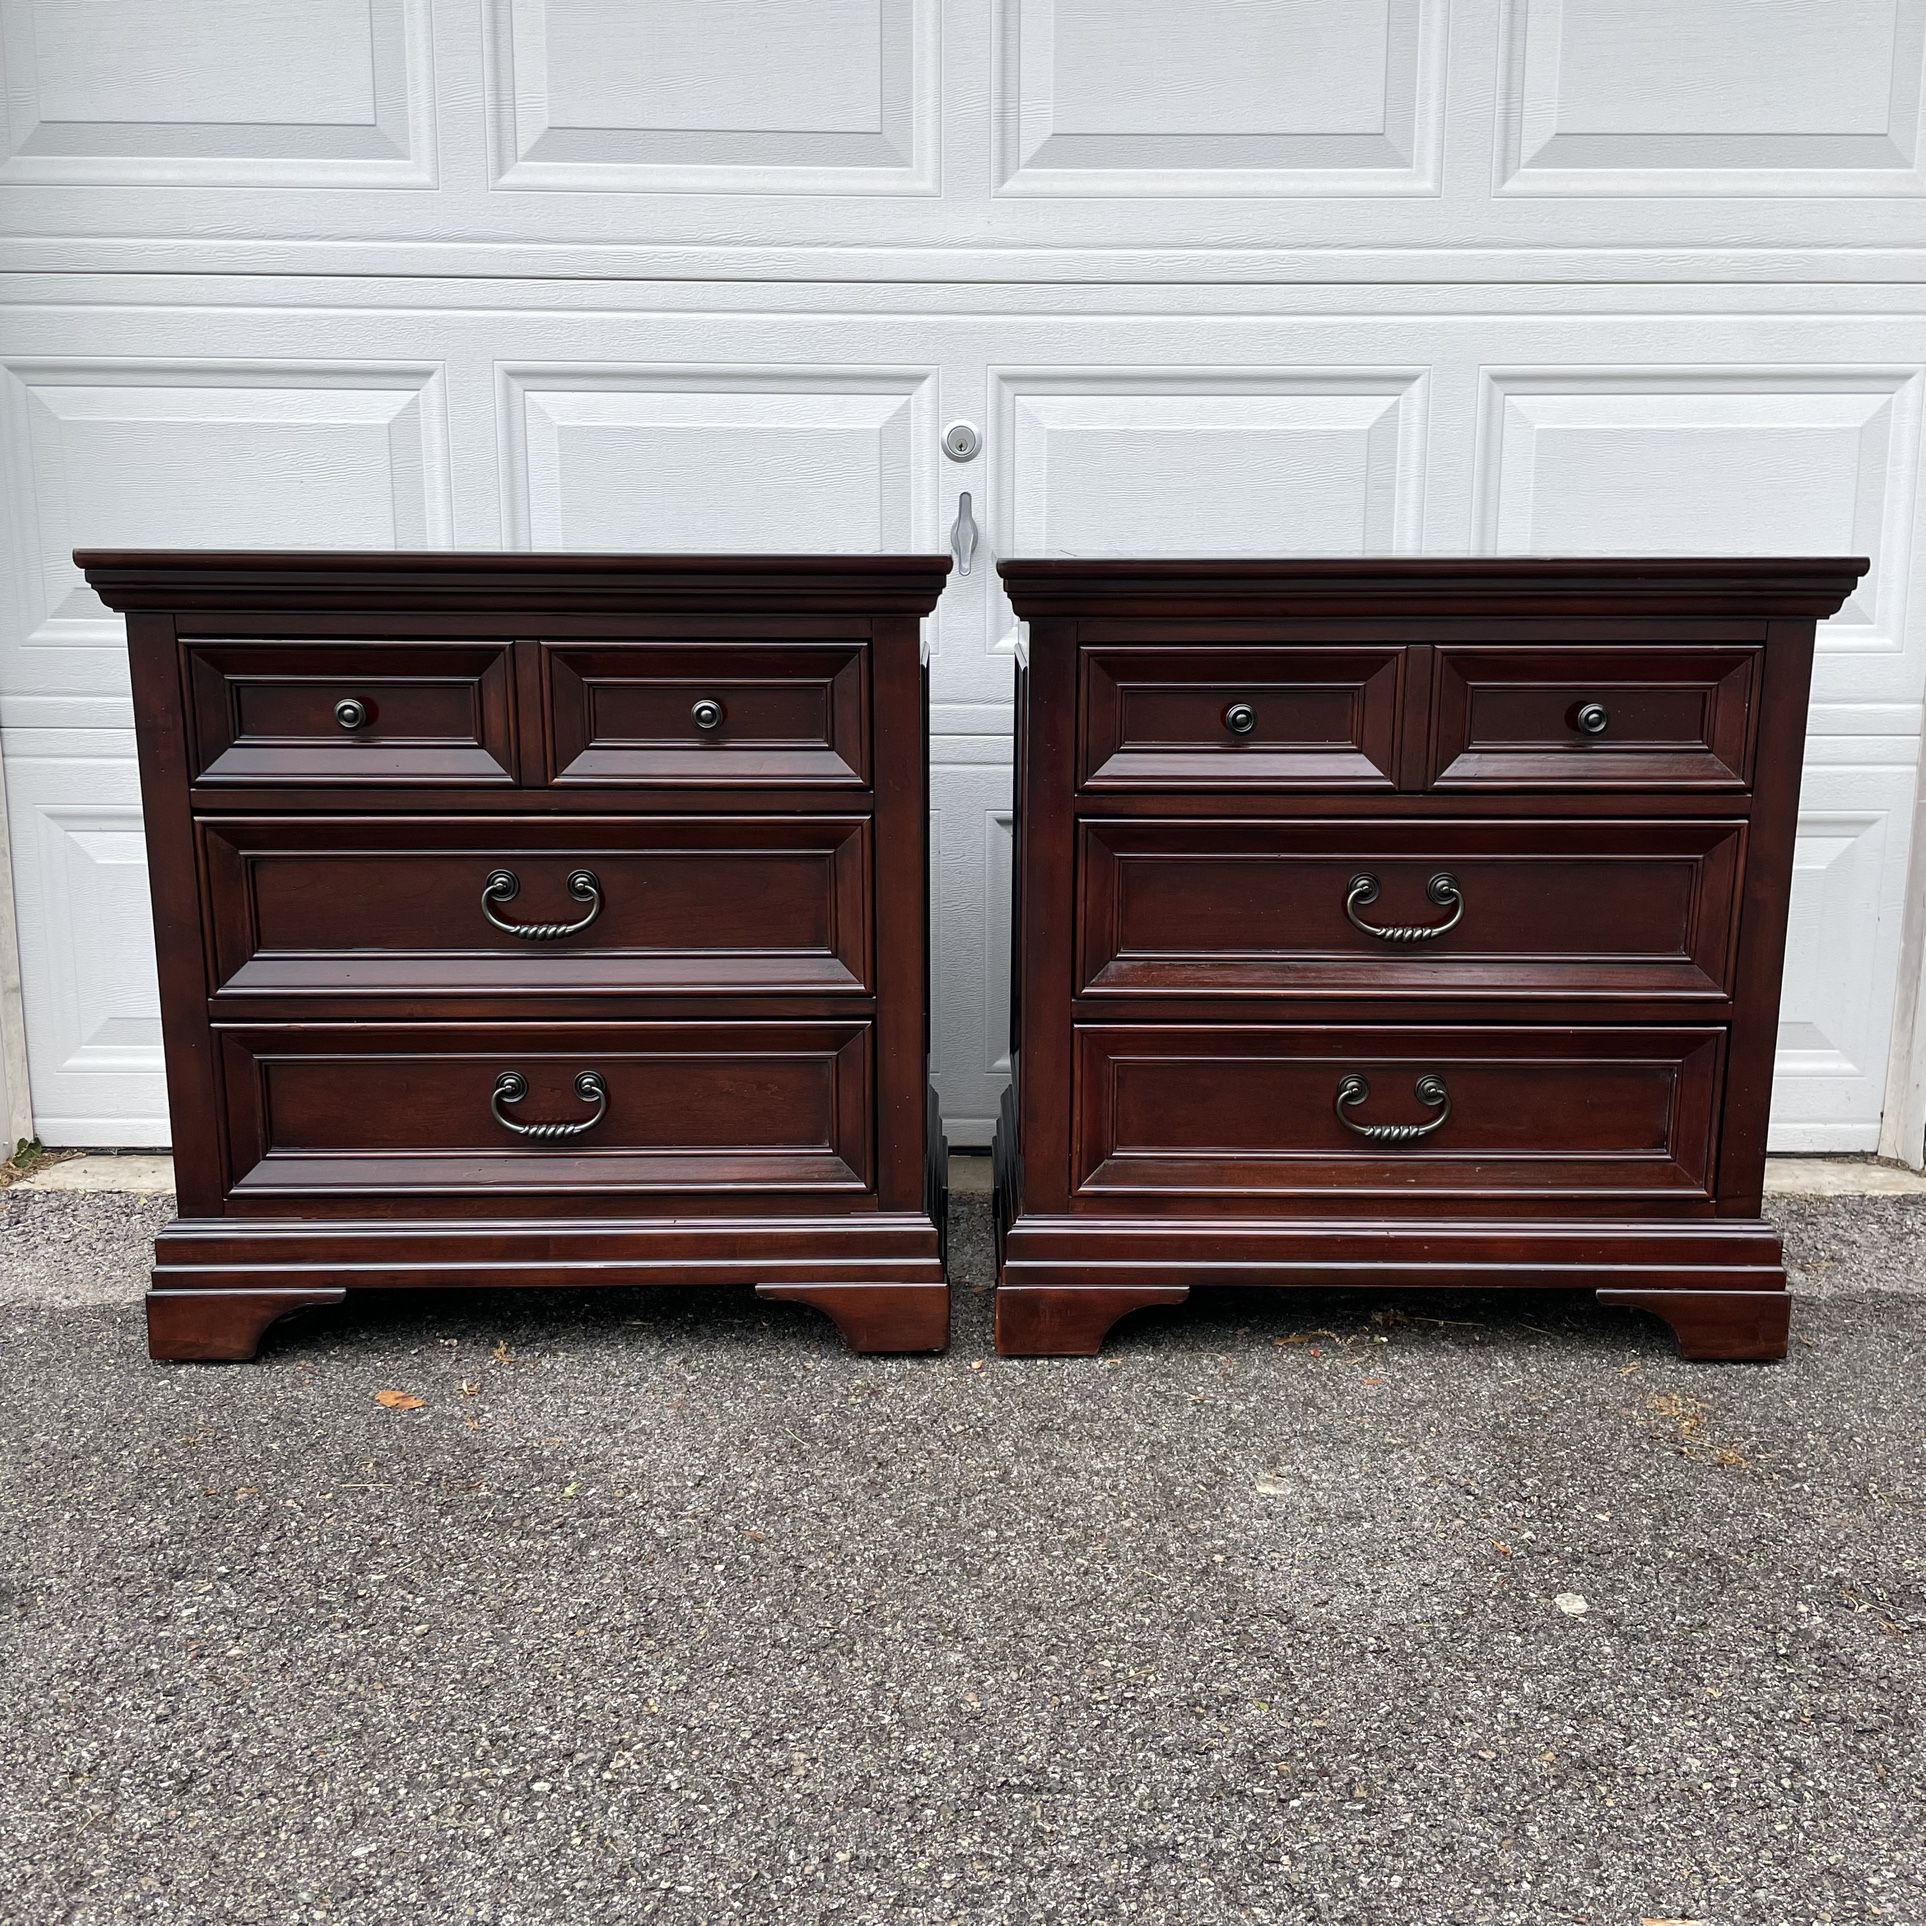 2 Large Night Stand Bed Side Tables